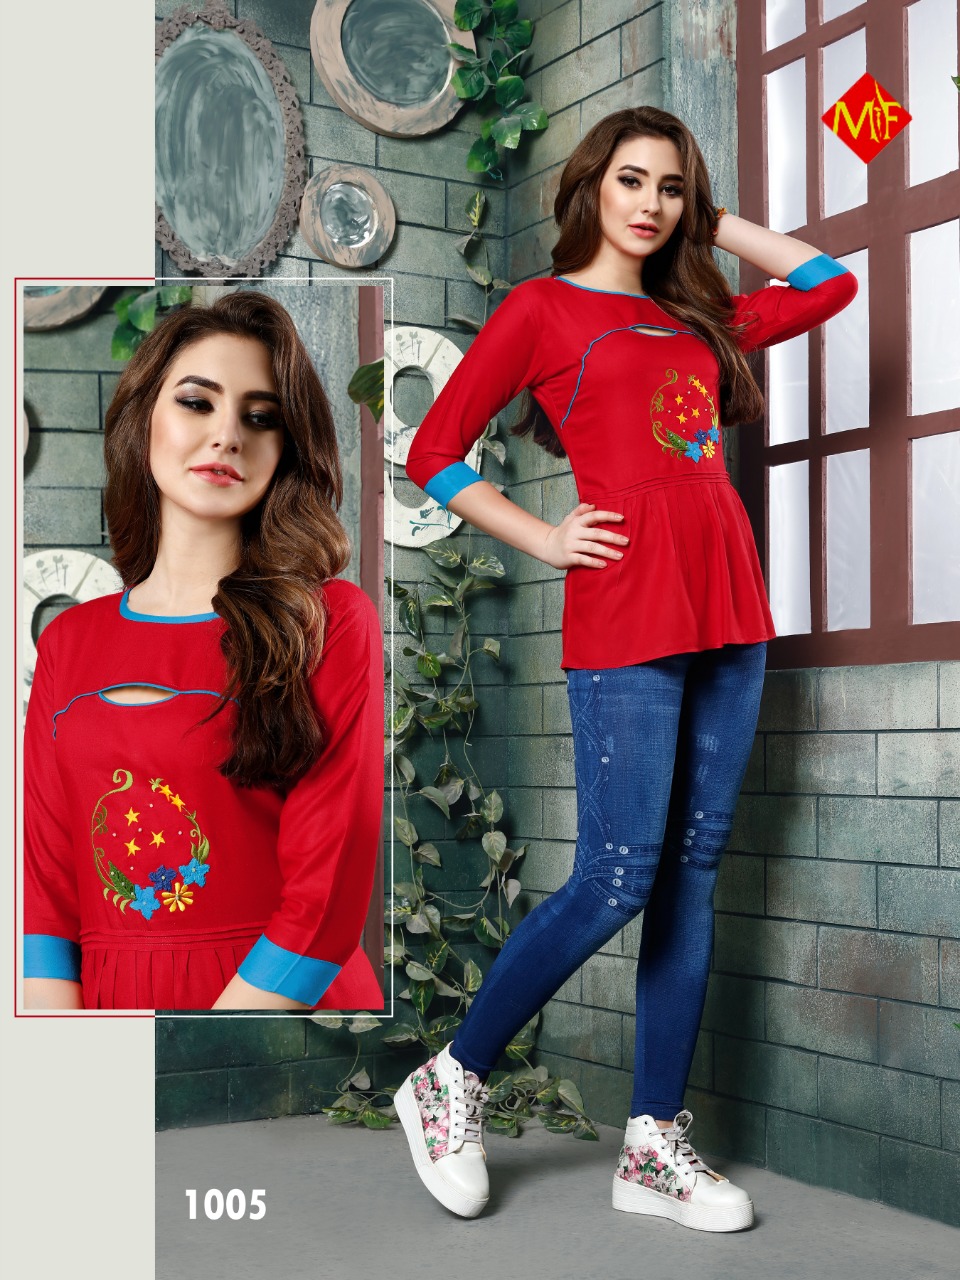 Mitali fashion launch heritage ready to wear kurtis collection